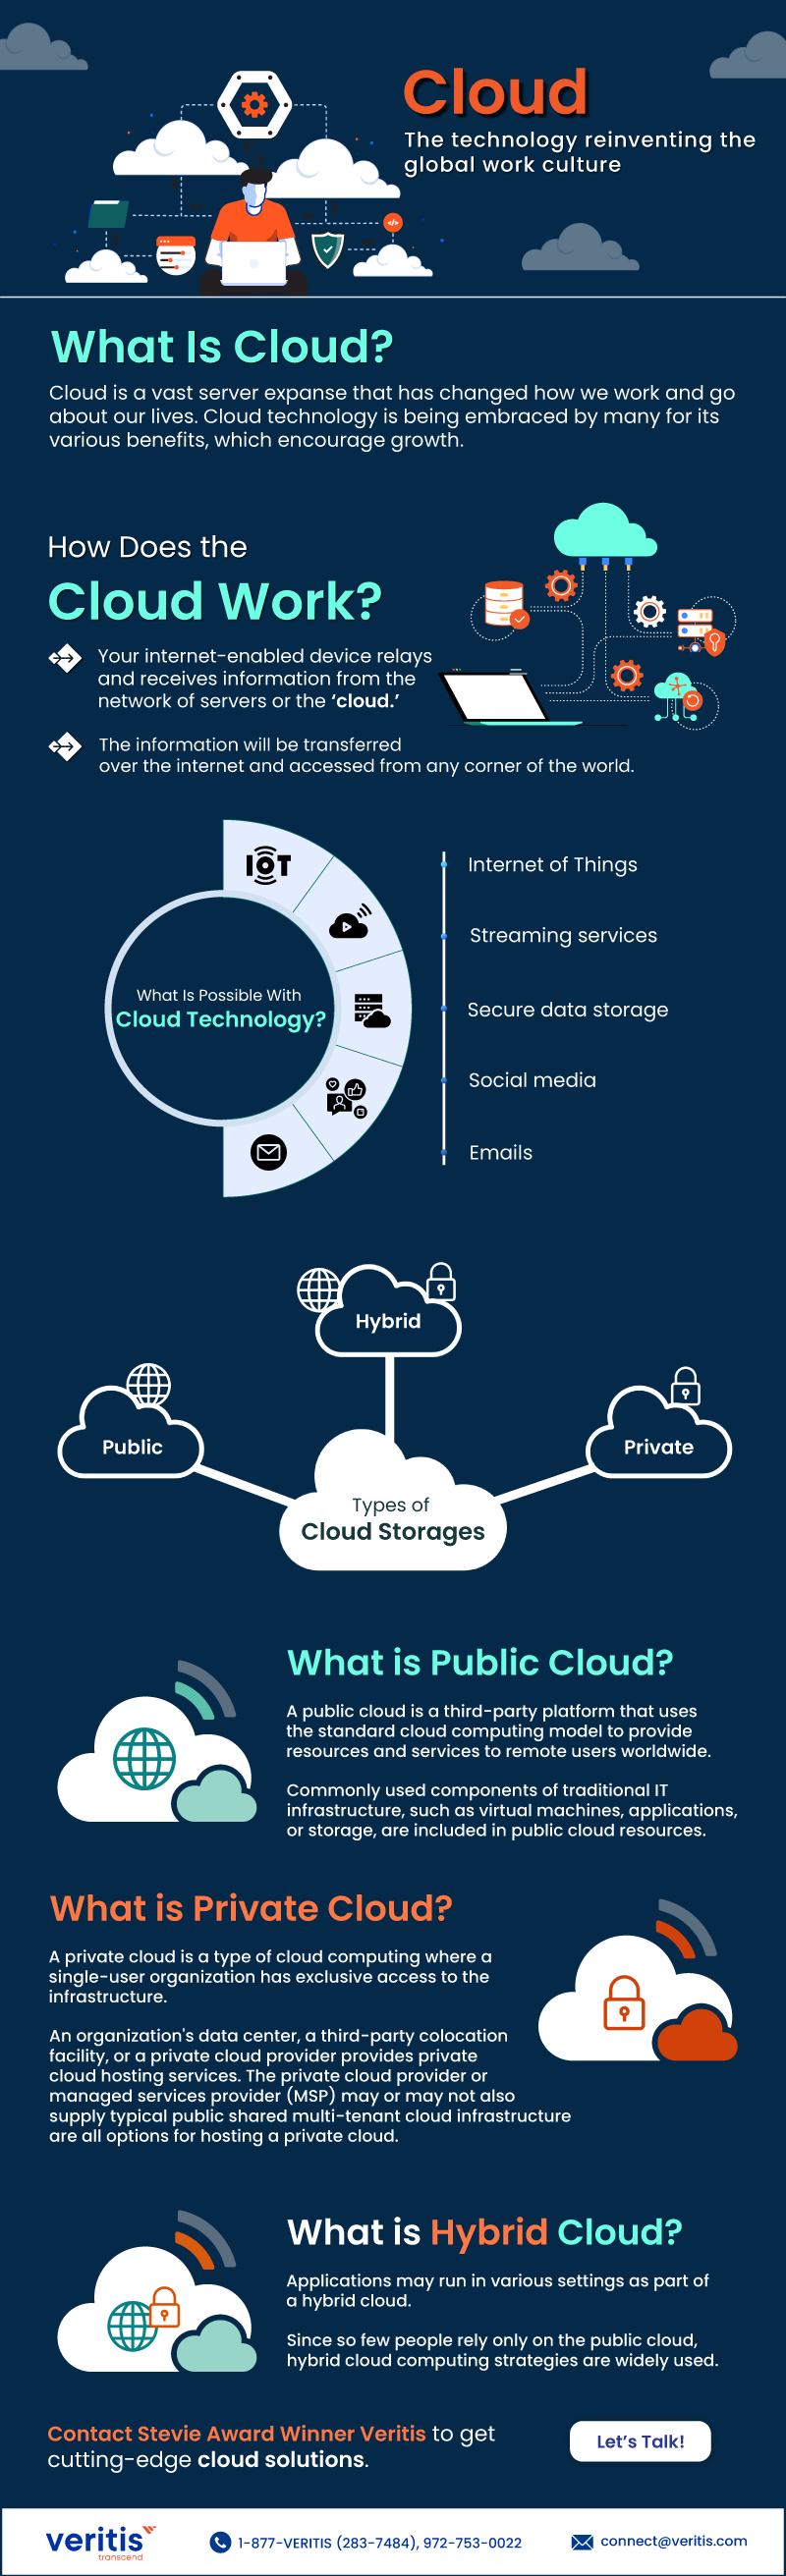 Cloud: The technology reinventing the global work culture